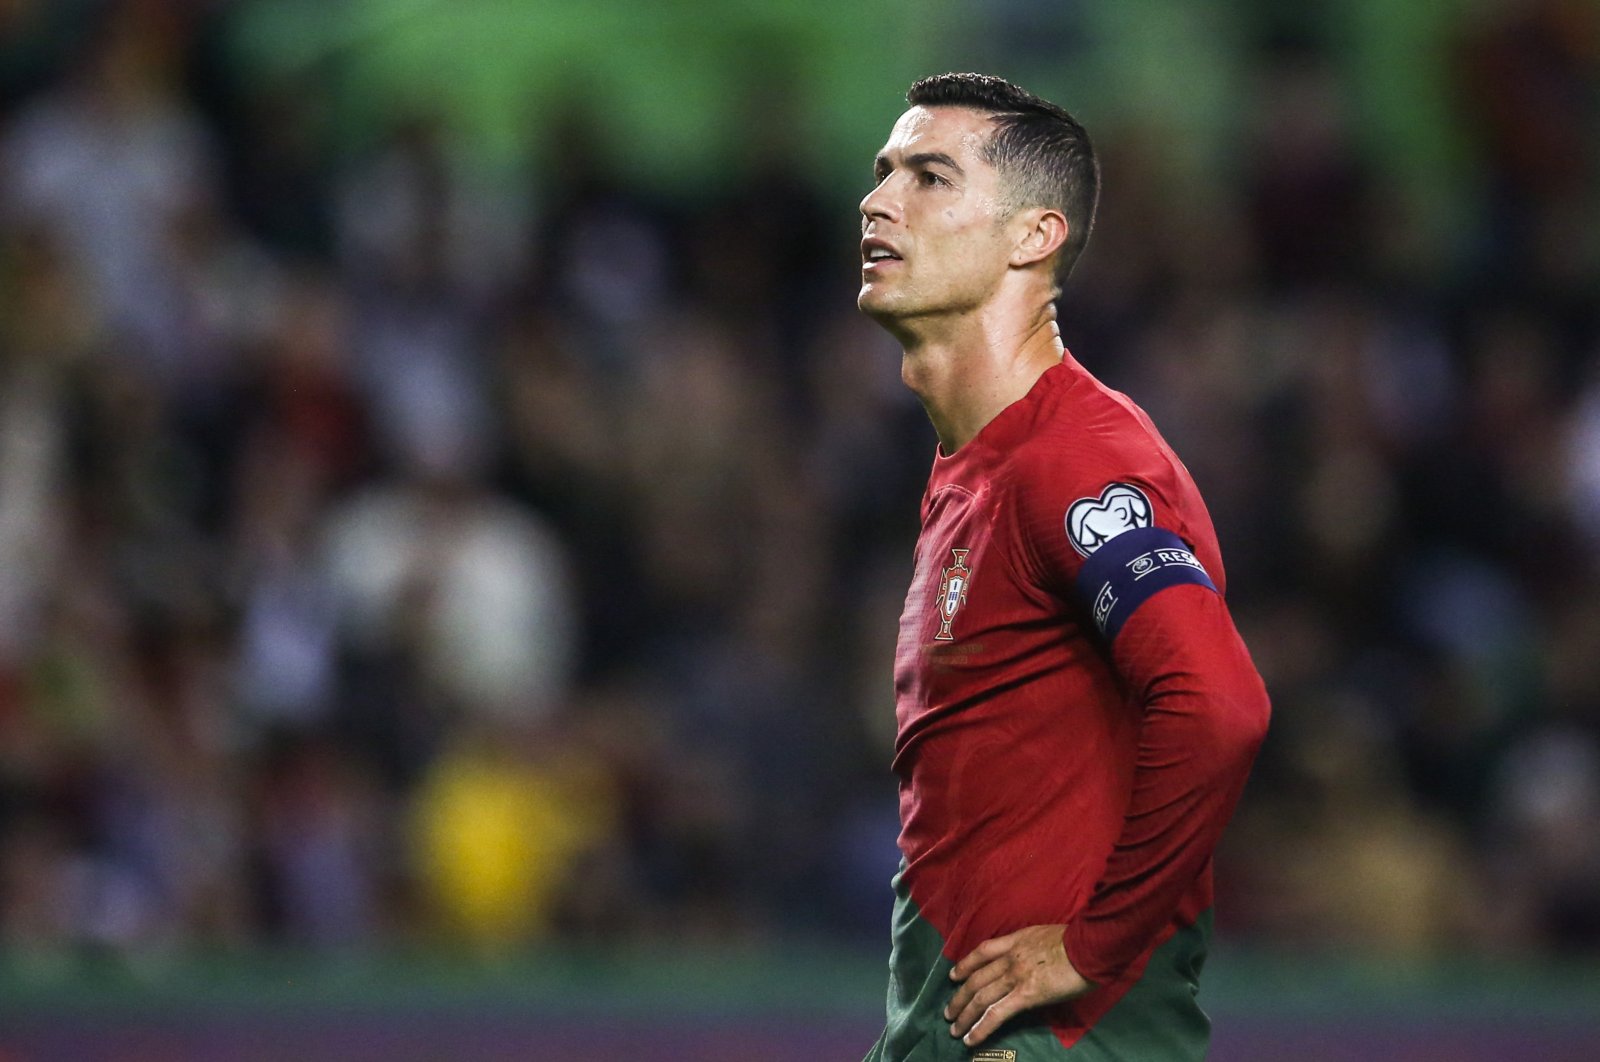 Portugal&#039;s forward Cristiano Ronaldo reacts during the UEFA Euro 2024 qualification match between Portugal and Liechtenstein at the Jose Alvalade stadium in Lisbon on March 23, 2023. (AFP Photo)